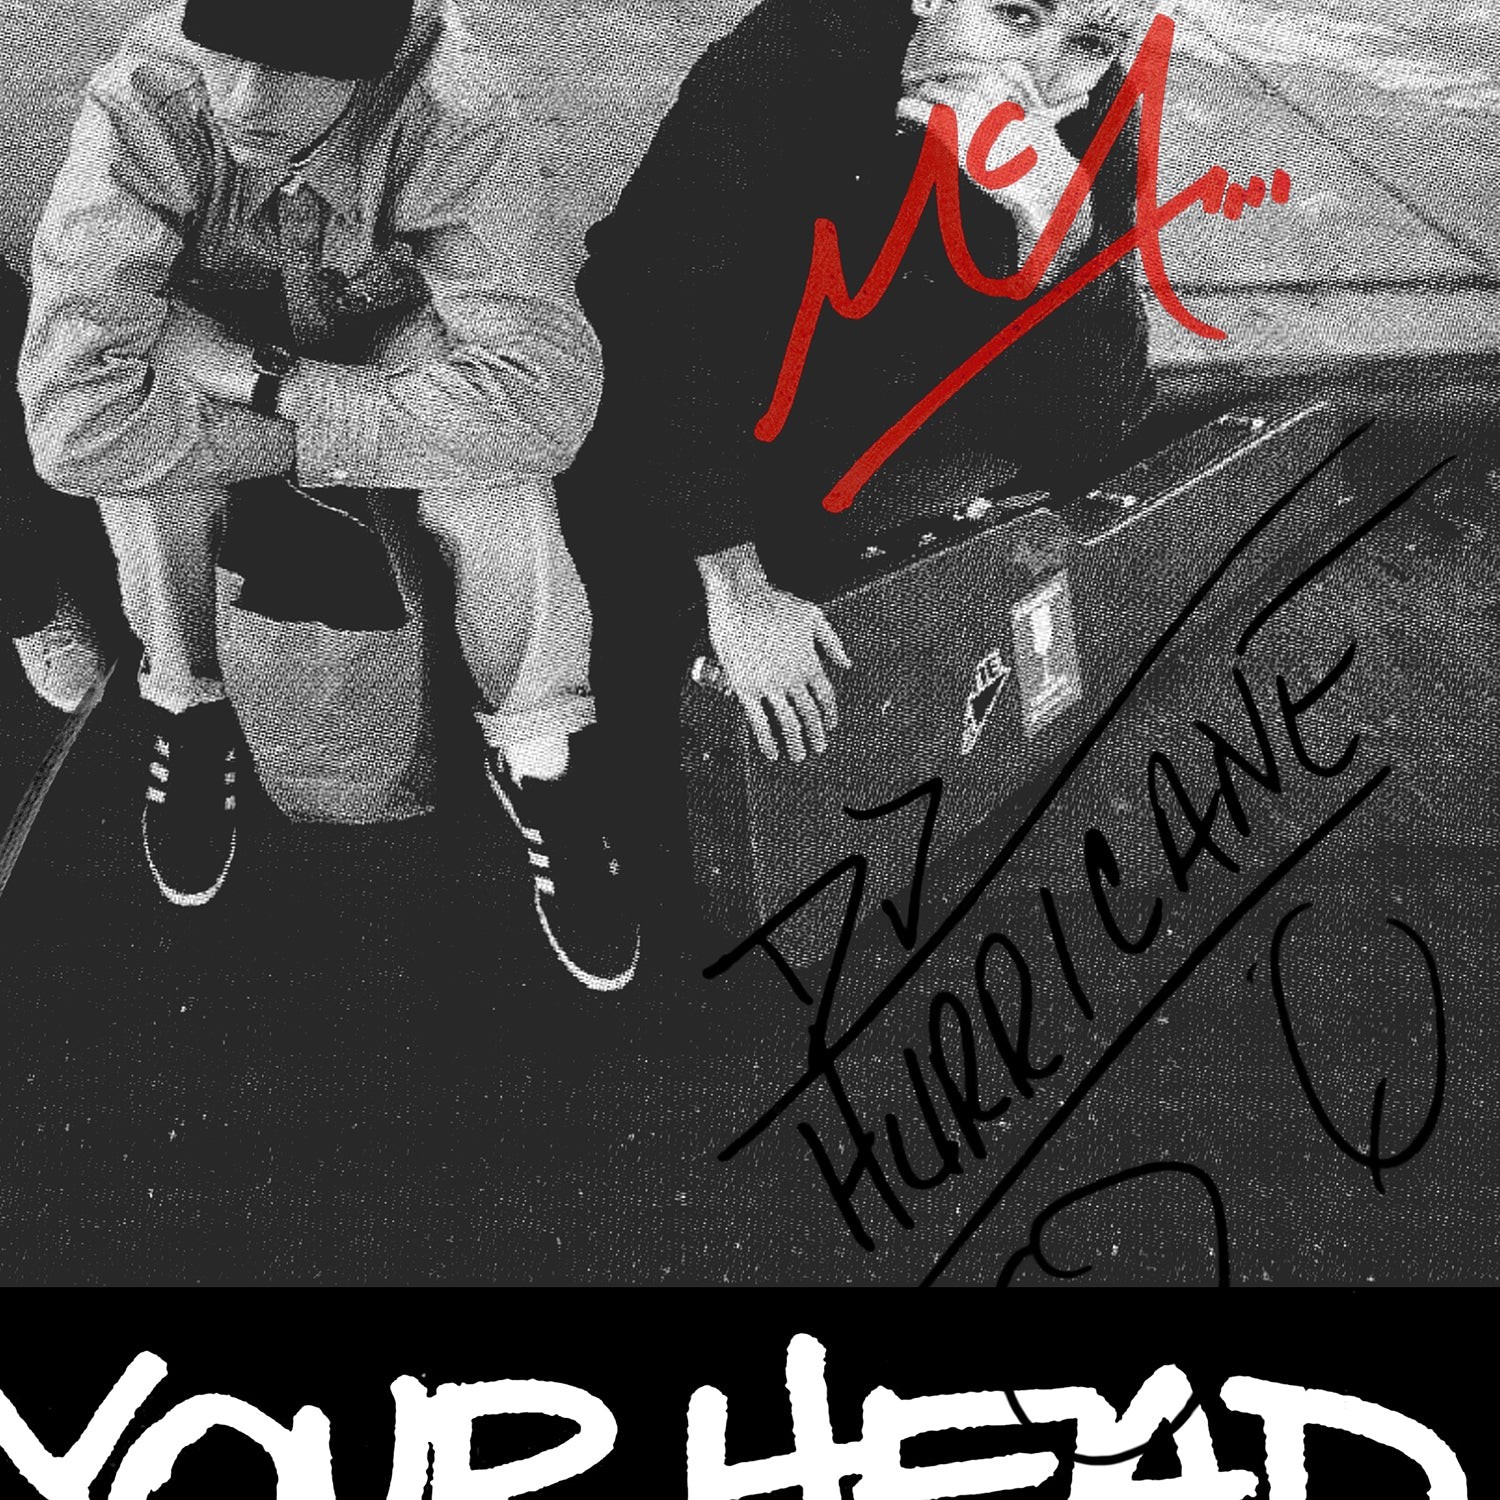 Beastie Boys Check Your Head LP Cover Limited Signature Edition